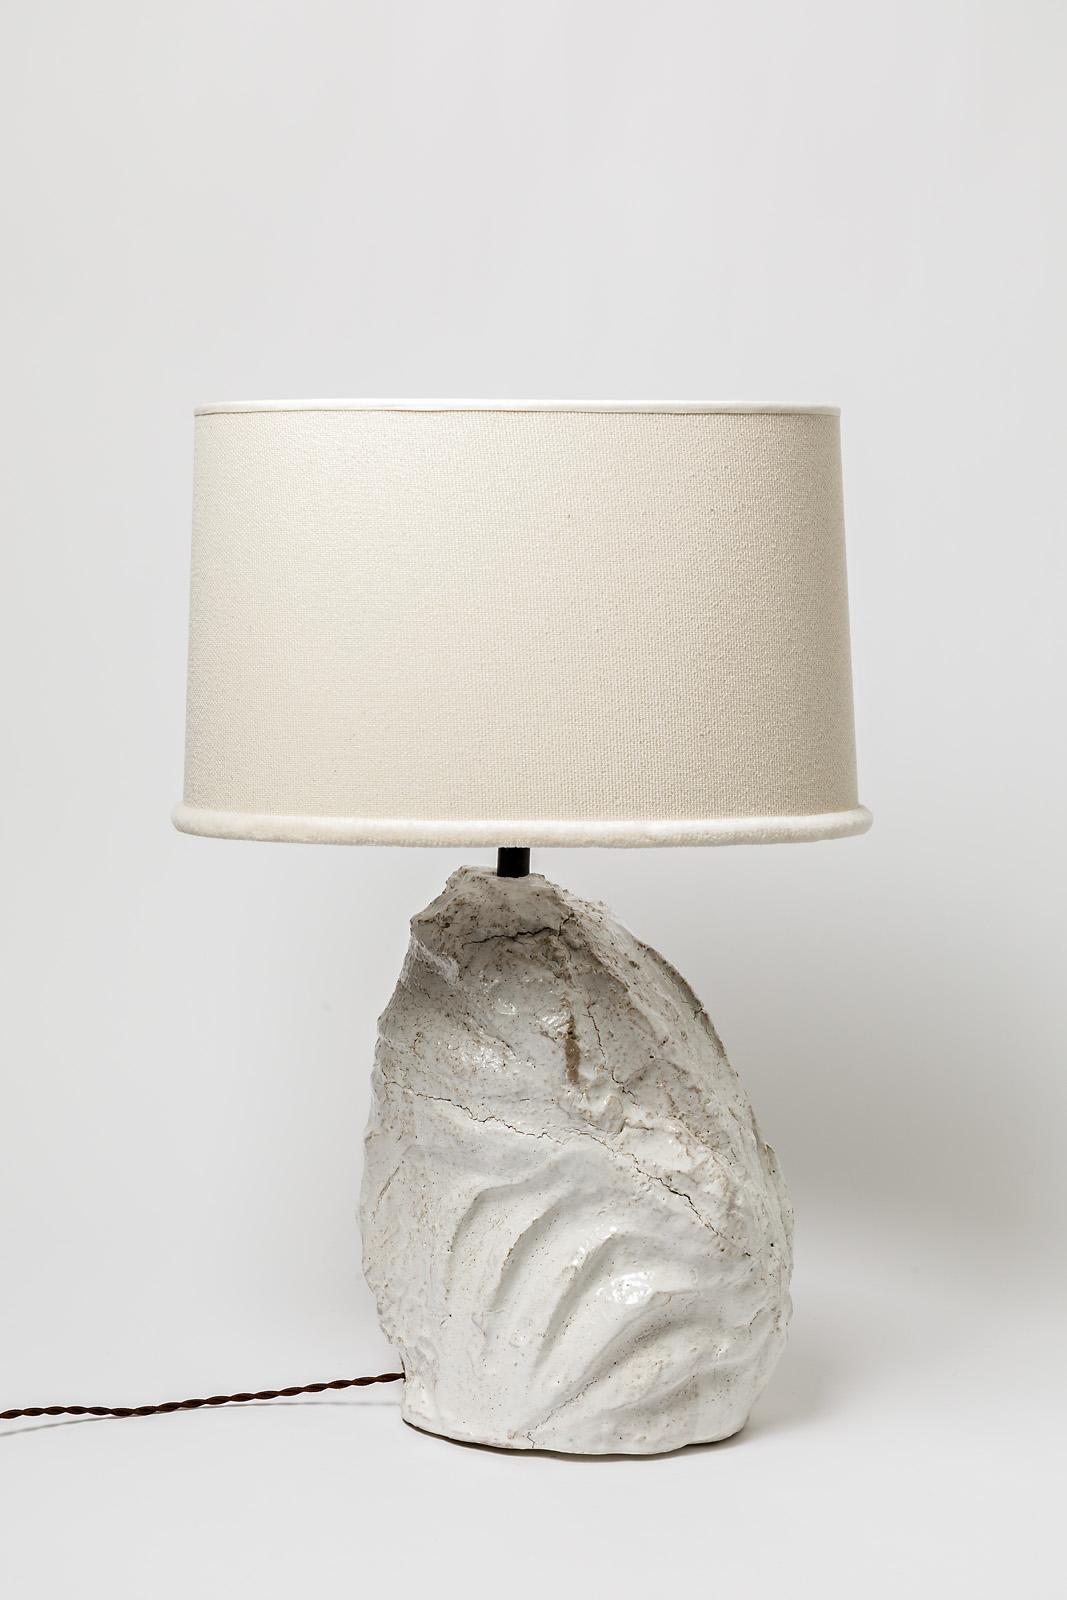 A ceramic table lamp with white glaze decoration.
Sold with a new lampshade and a new European electrical system.
Signed under the base.
Perfect original conditions.
Circa 2022.
It' s possible to have a pair and few pieces.
Dimensions are